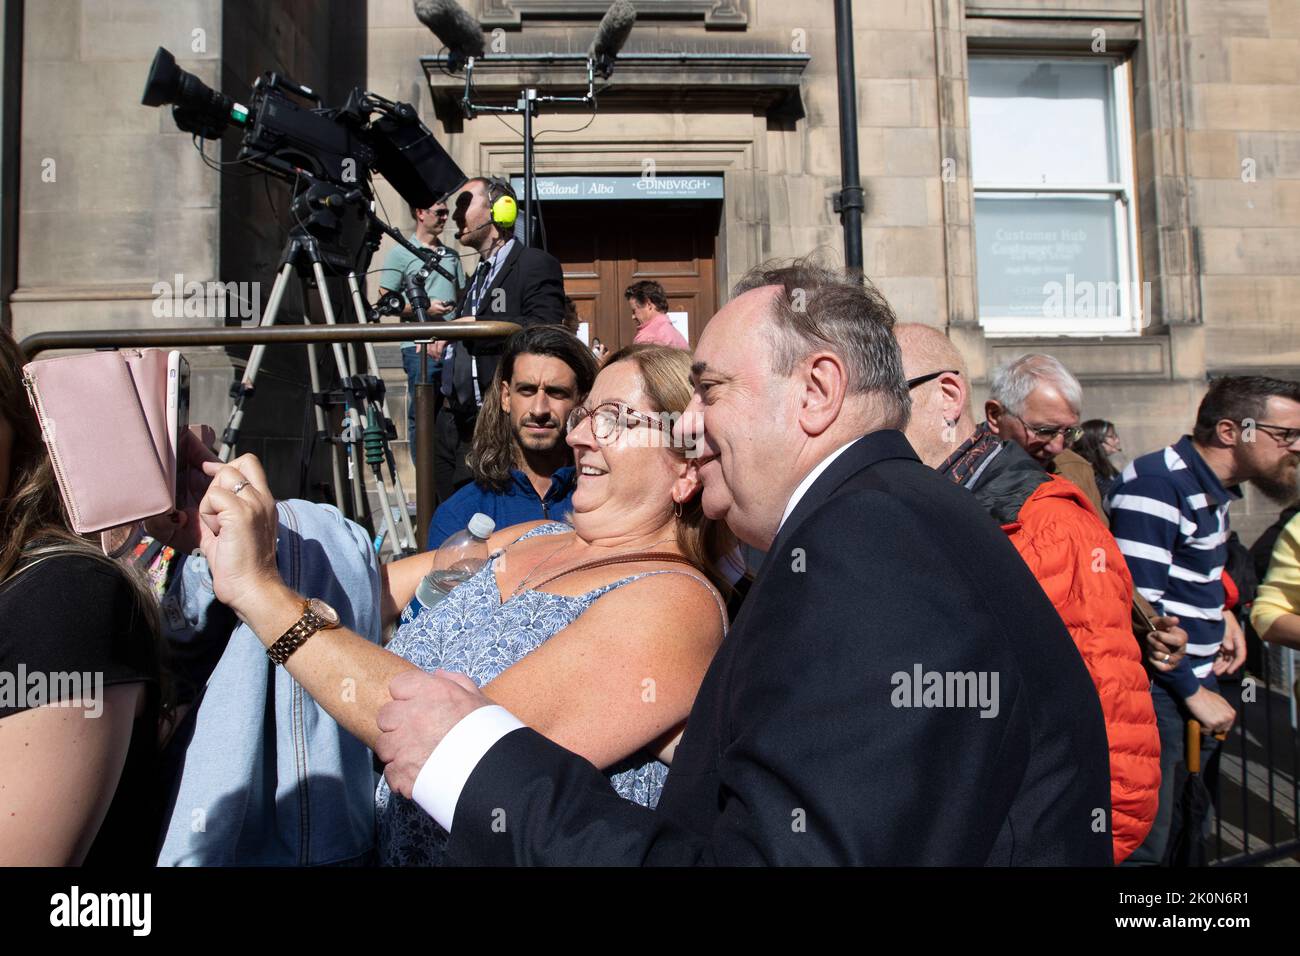 Edinburgh 12th September 20202. Hunders of Thousands people gather in the Royal Mile to glimpse of Her Majesty's Coffin on the way to St Gile's Cathedral in Edinburgh. The Queen died peacefully at Balmoral on 8th September 2022. Pictured: Former First Minister Alex Salmond seen in the Royal Mile. Scotland. Pic Credit: Pako Mera/Alamy Live News Stock Photo